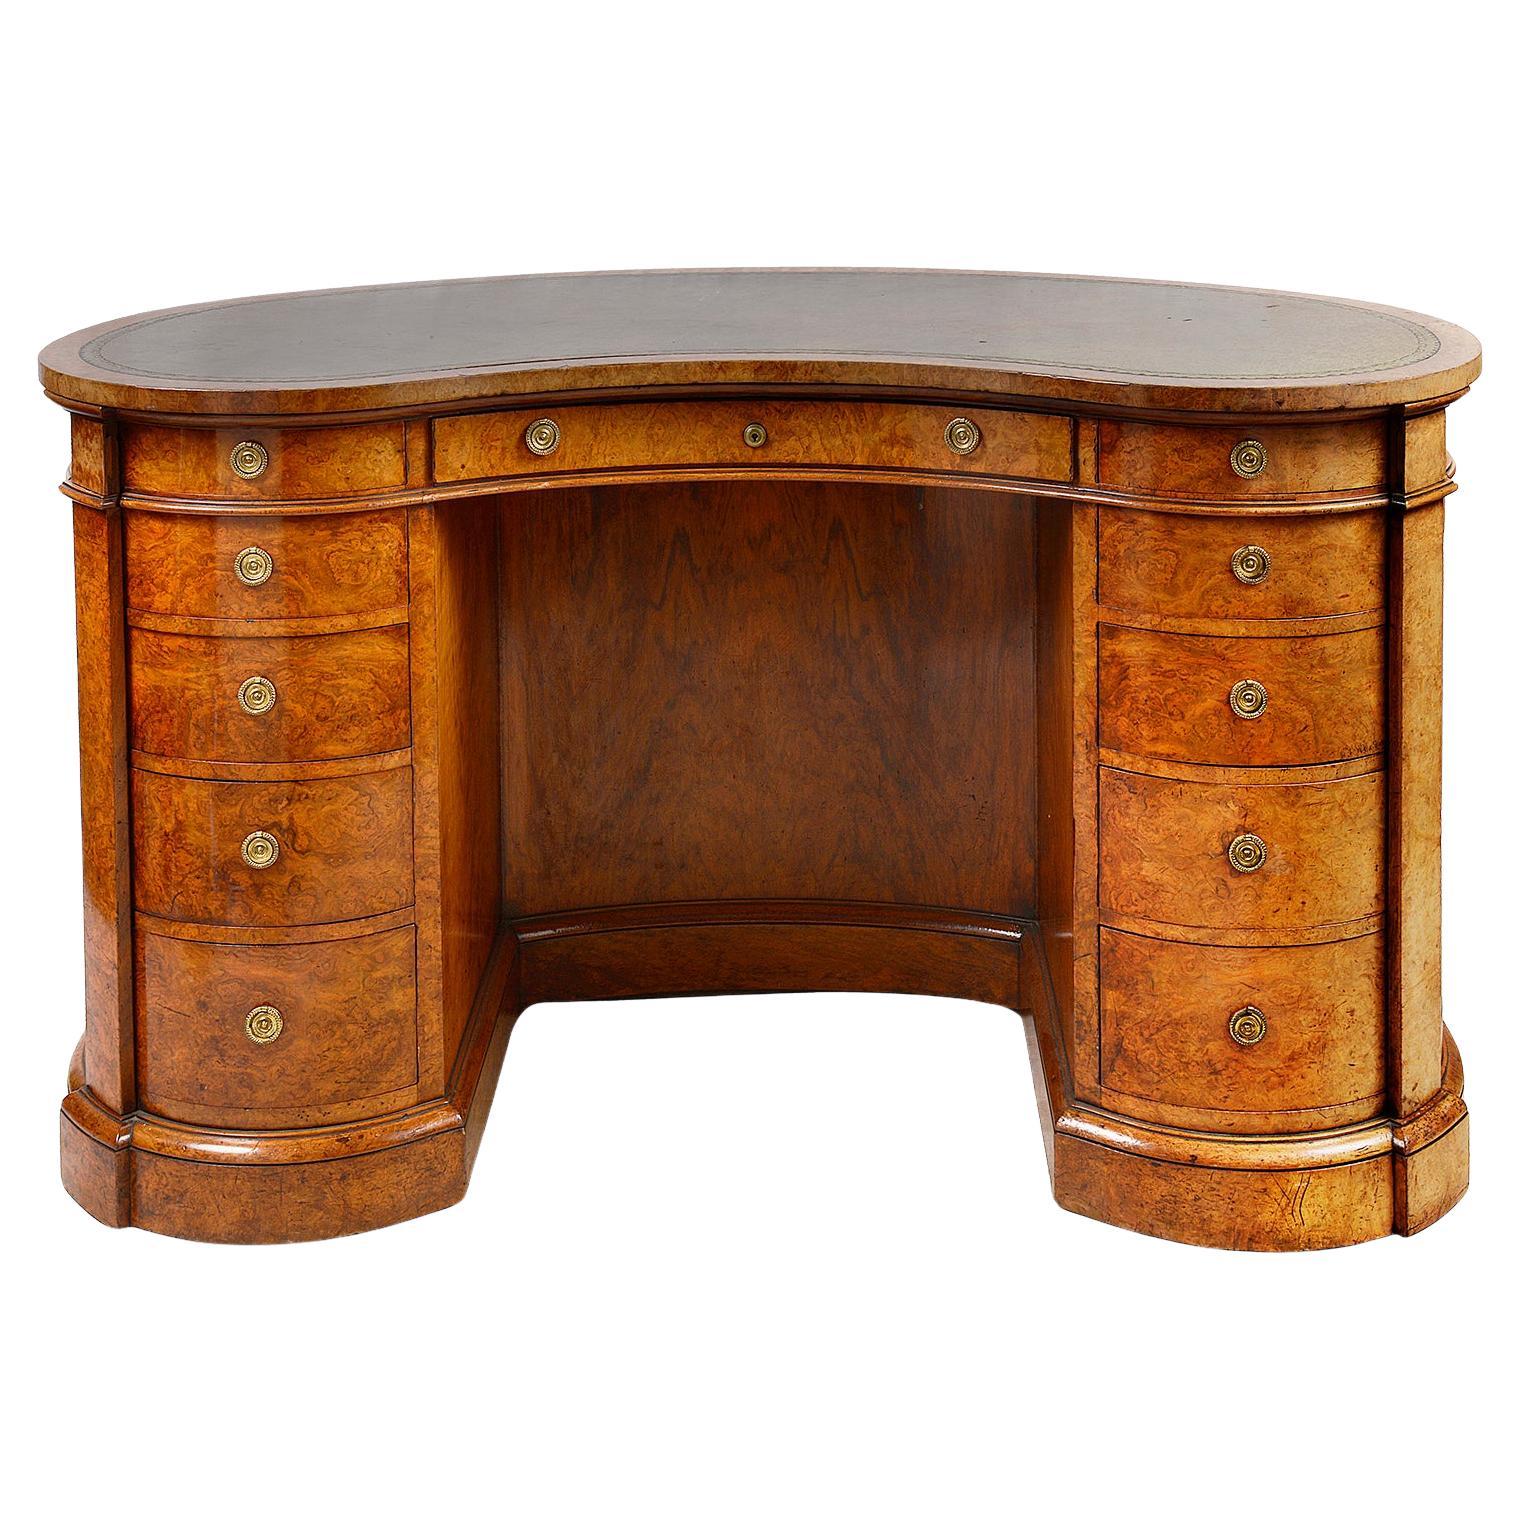 Gillows, 19th Century Walnut Kidney Shaped Desk For Sale